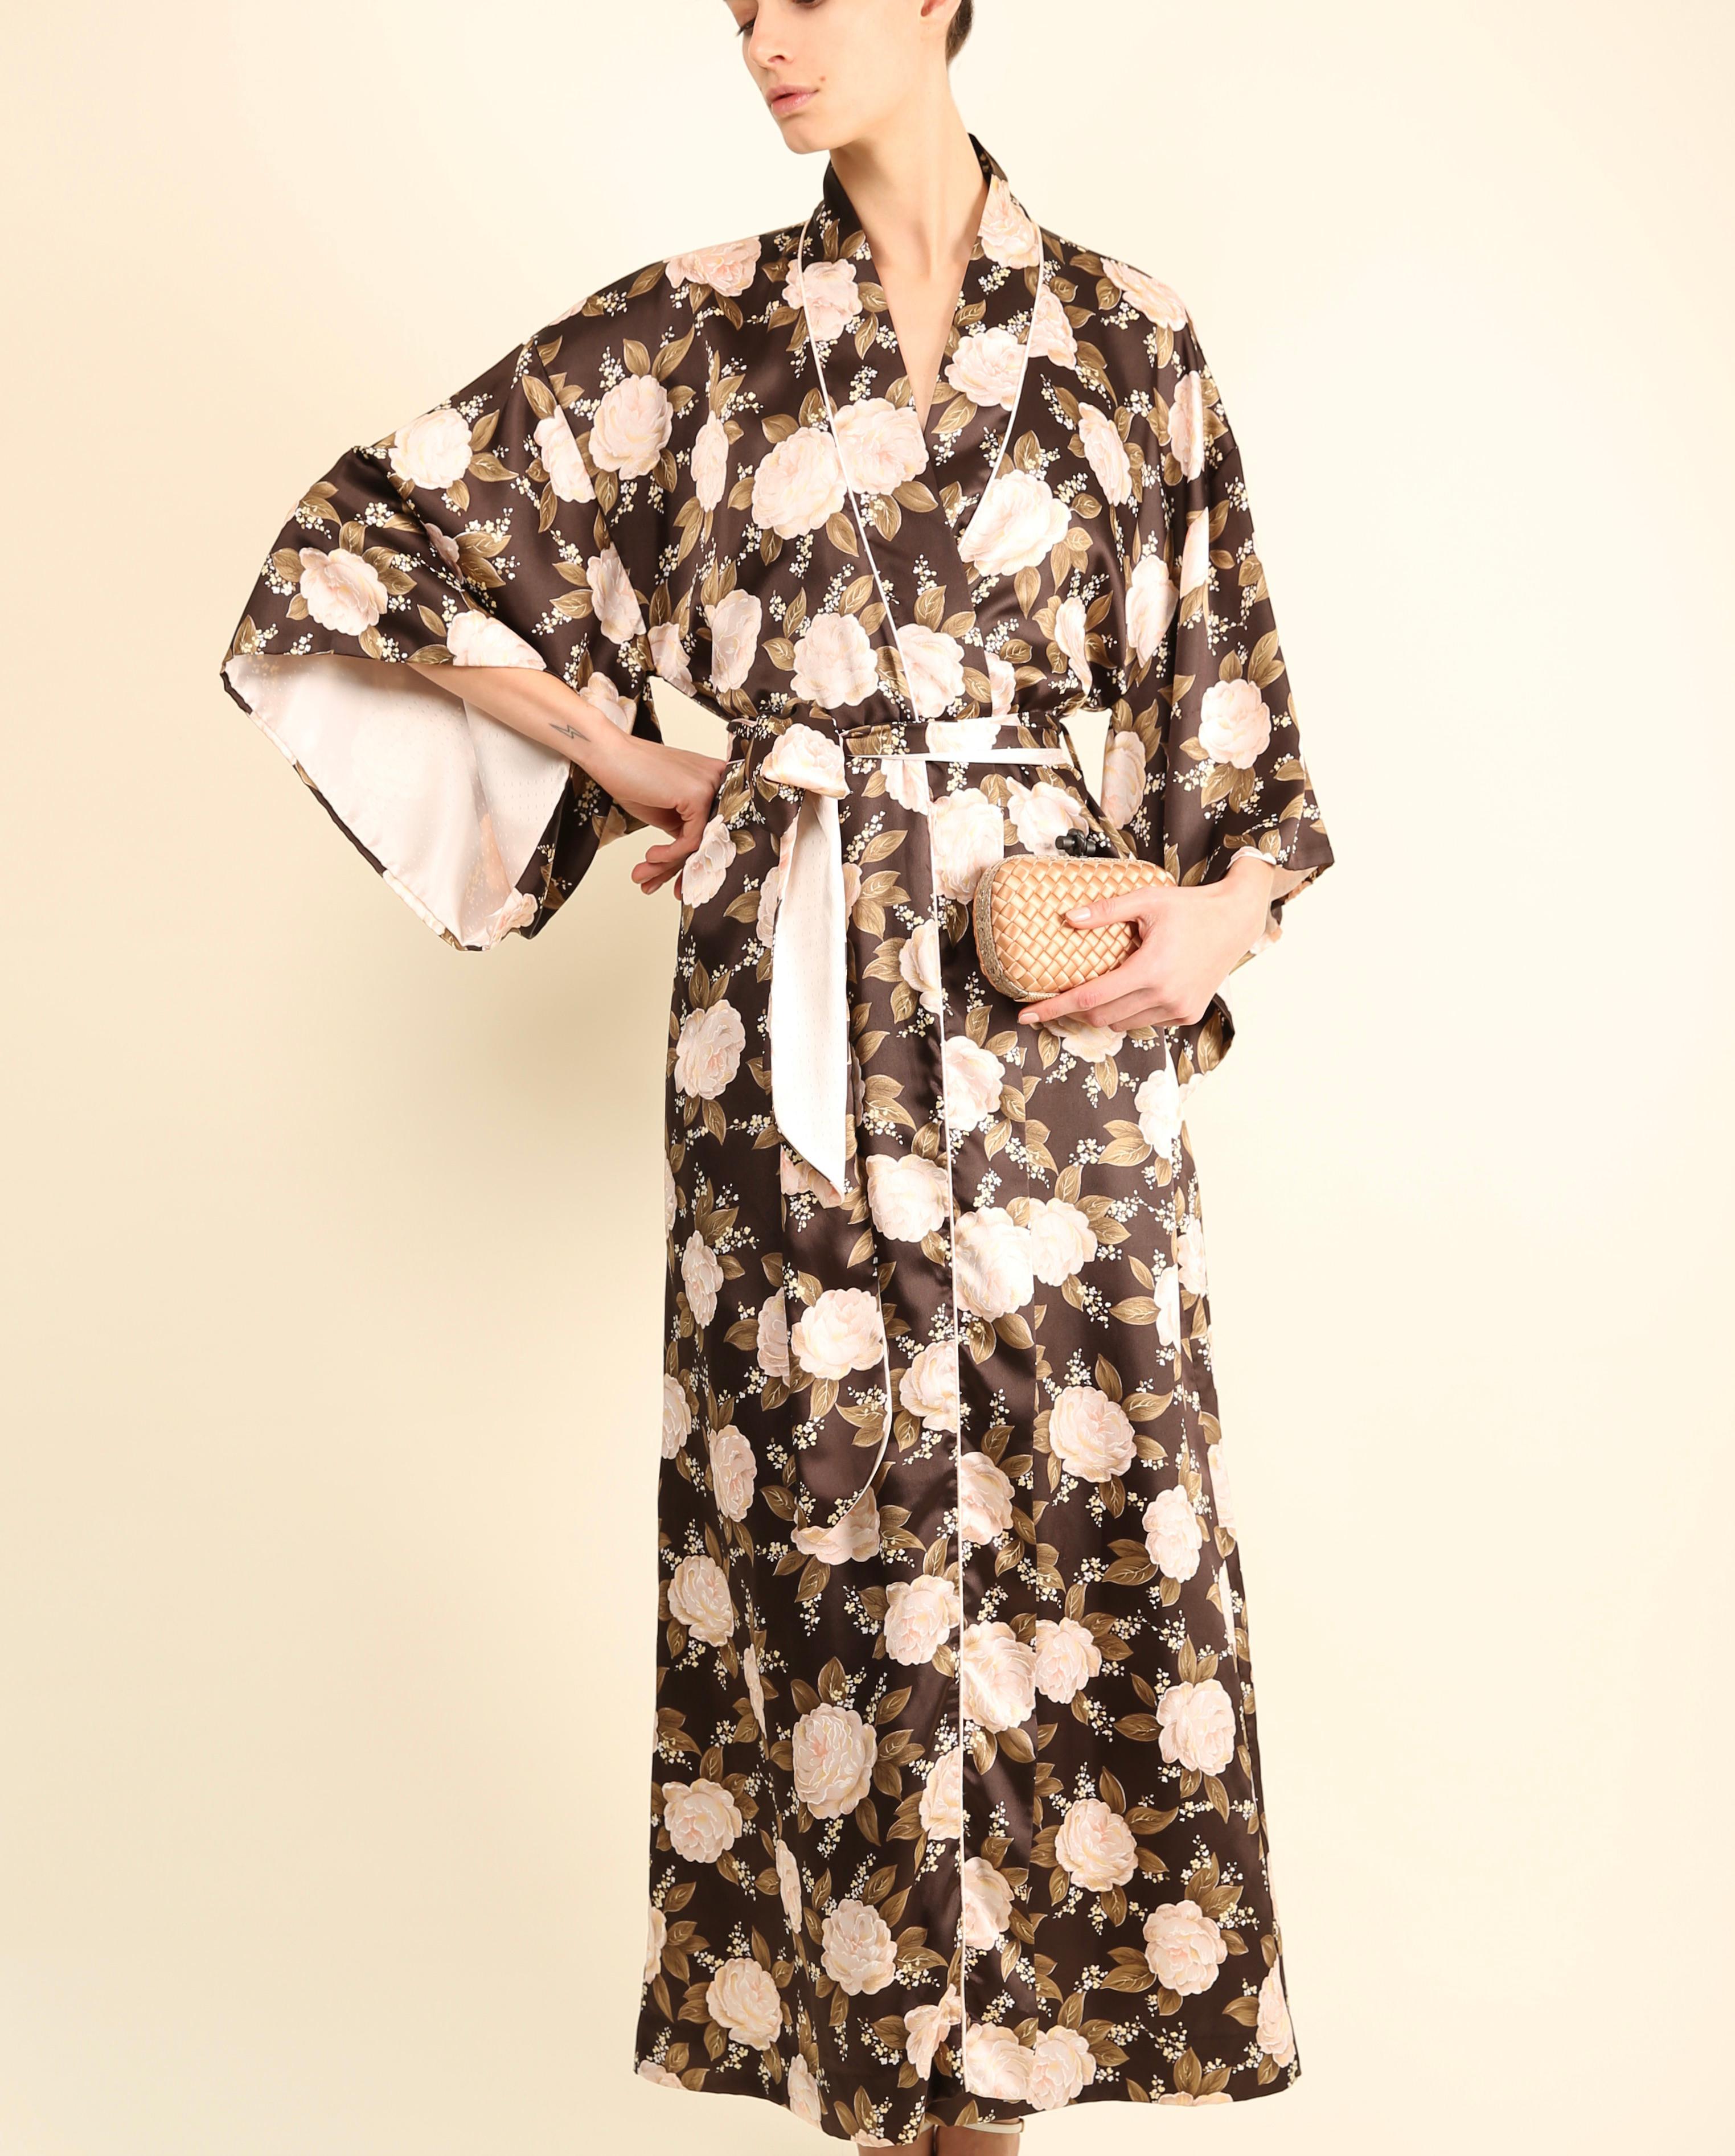 Christian Dior vintage brown pink floral kimono maxi coat dress robe night gown For Sale 9